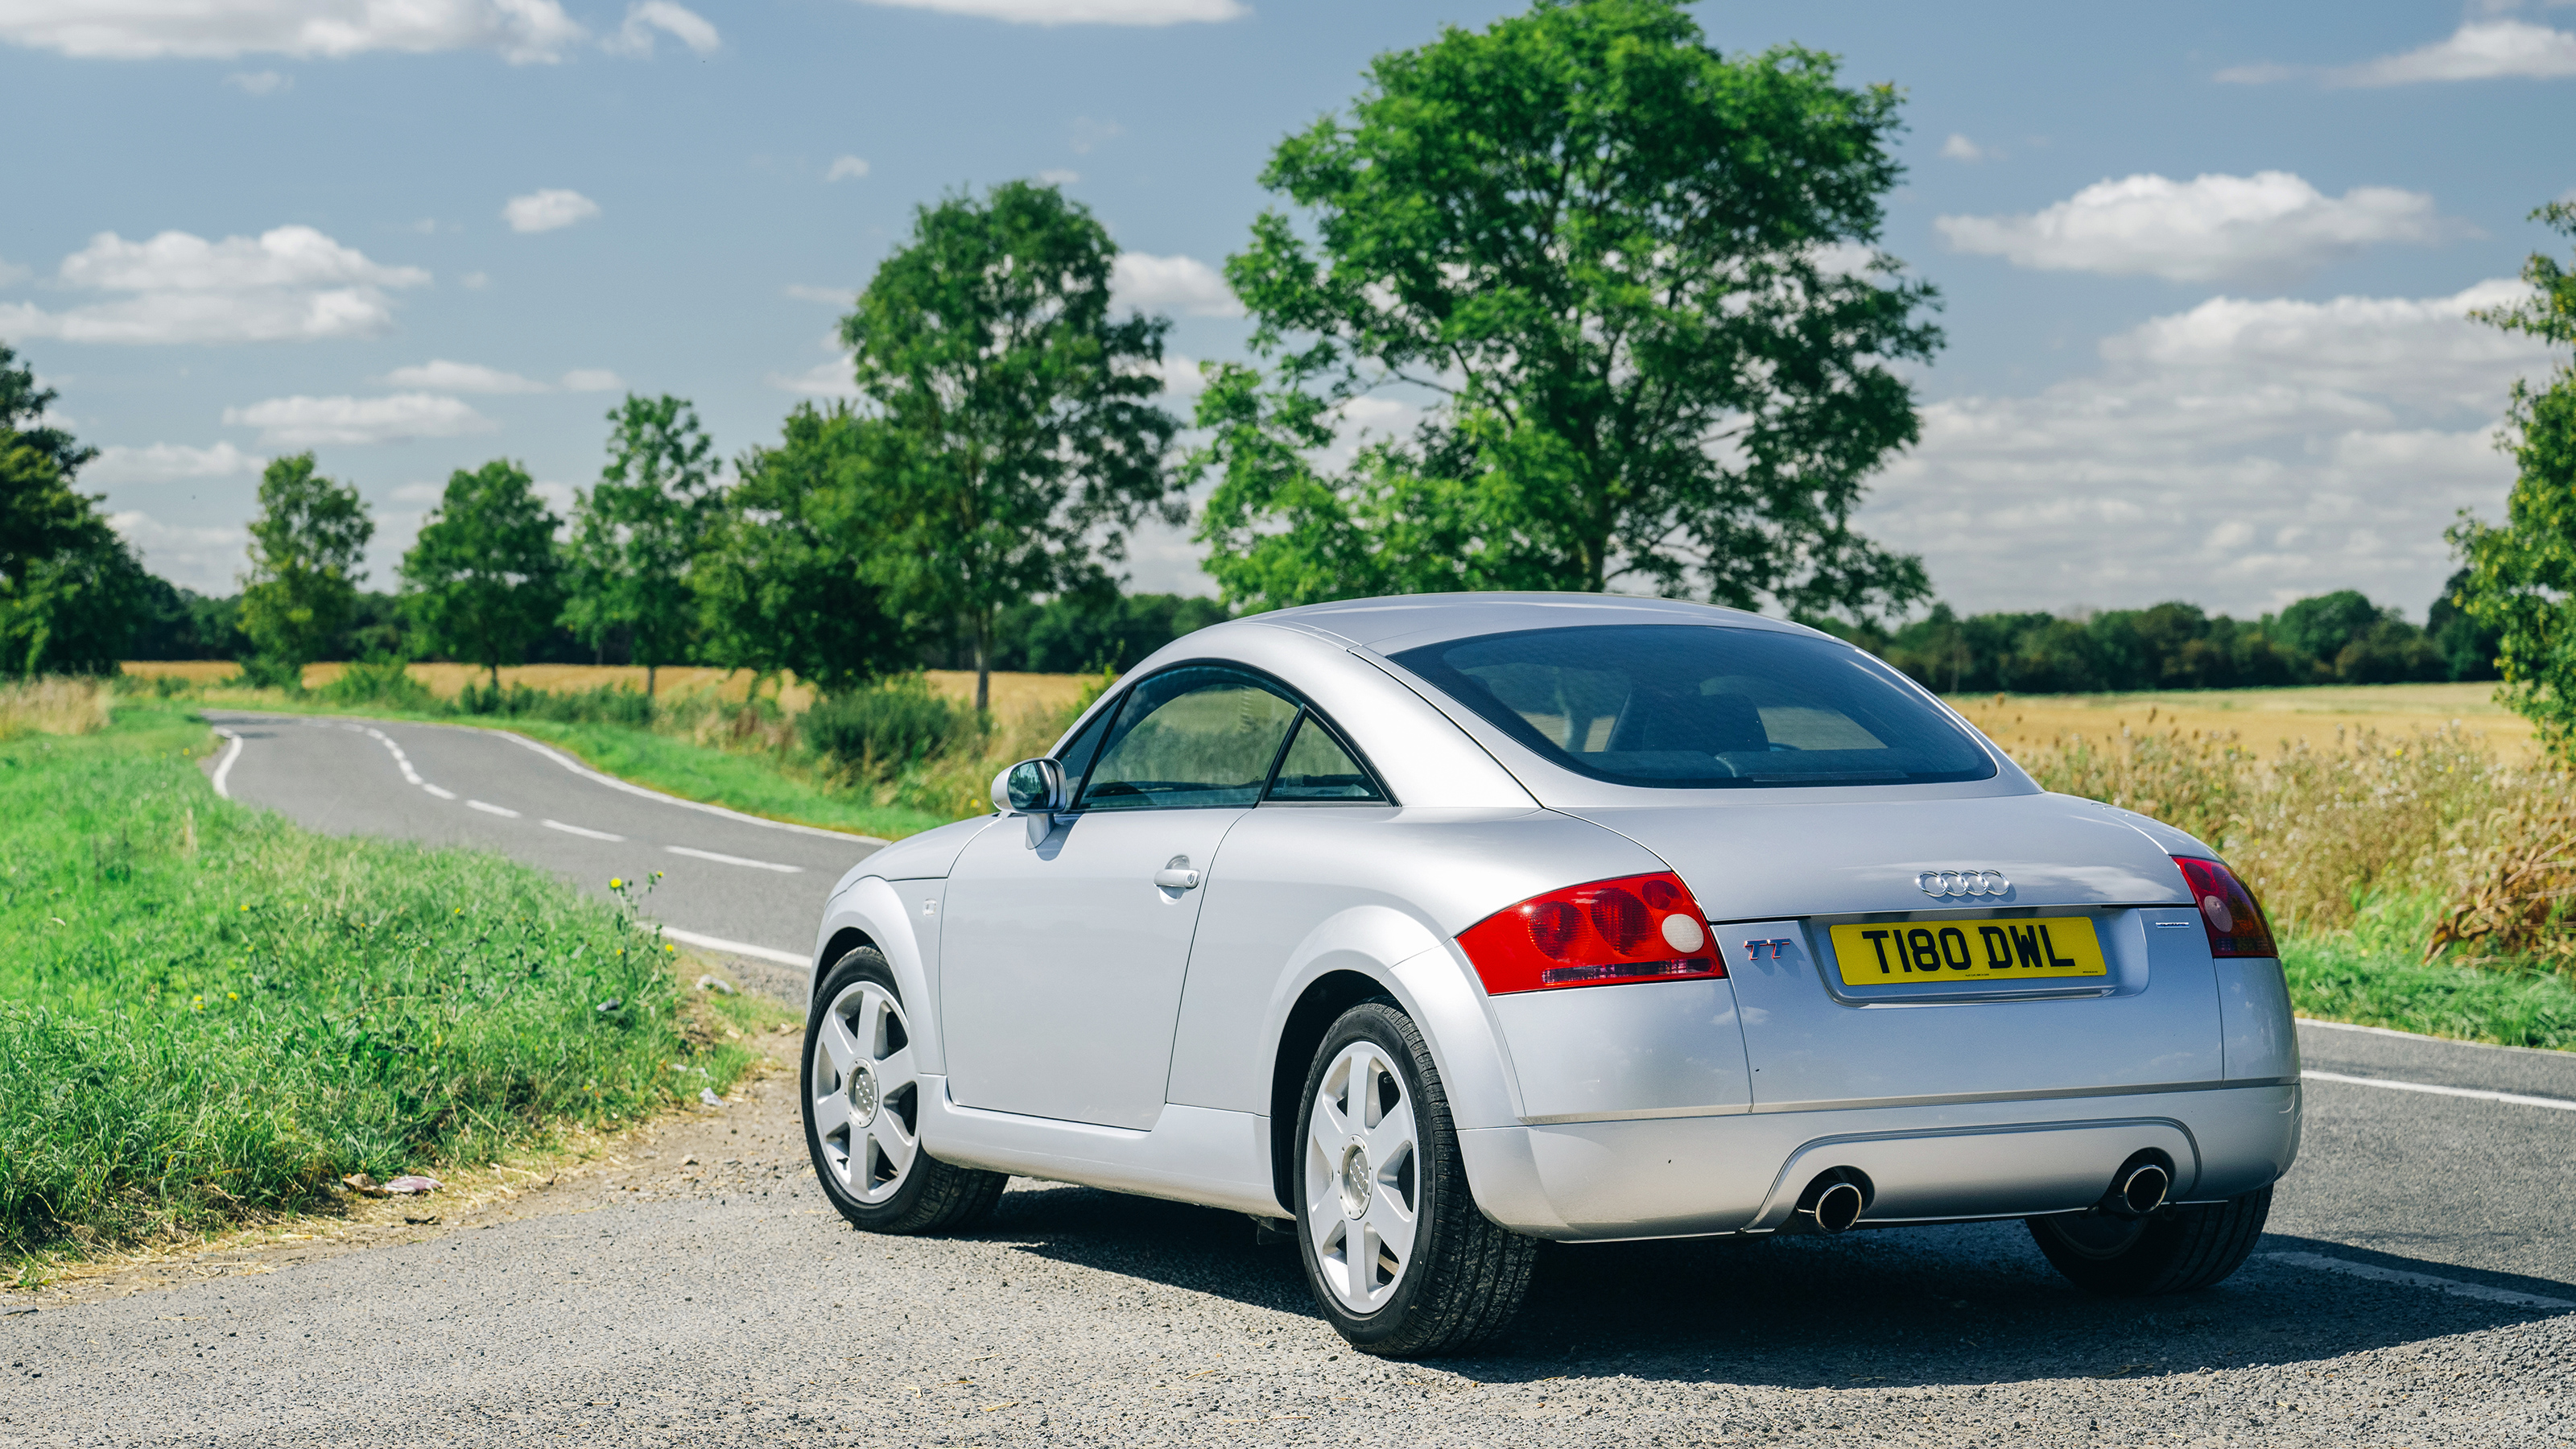 The Complete MK1 Audi TT Buying Guide for Car Enthusiasts